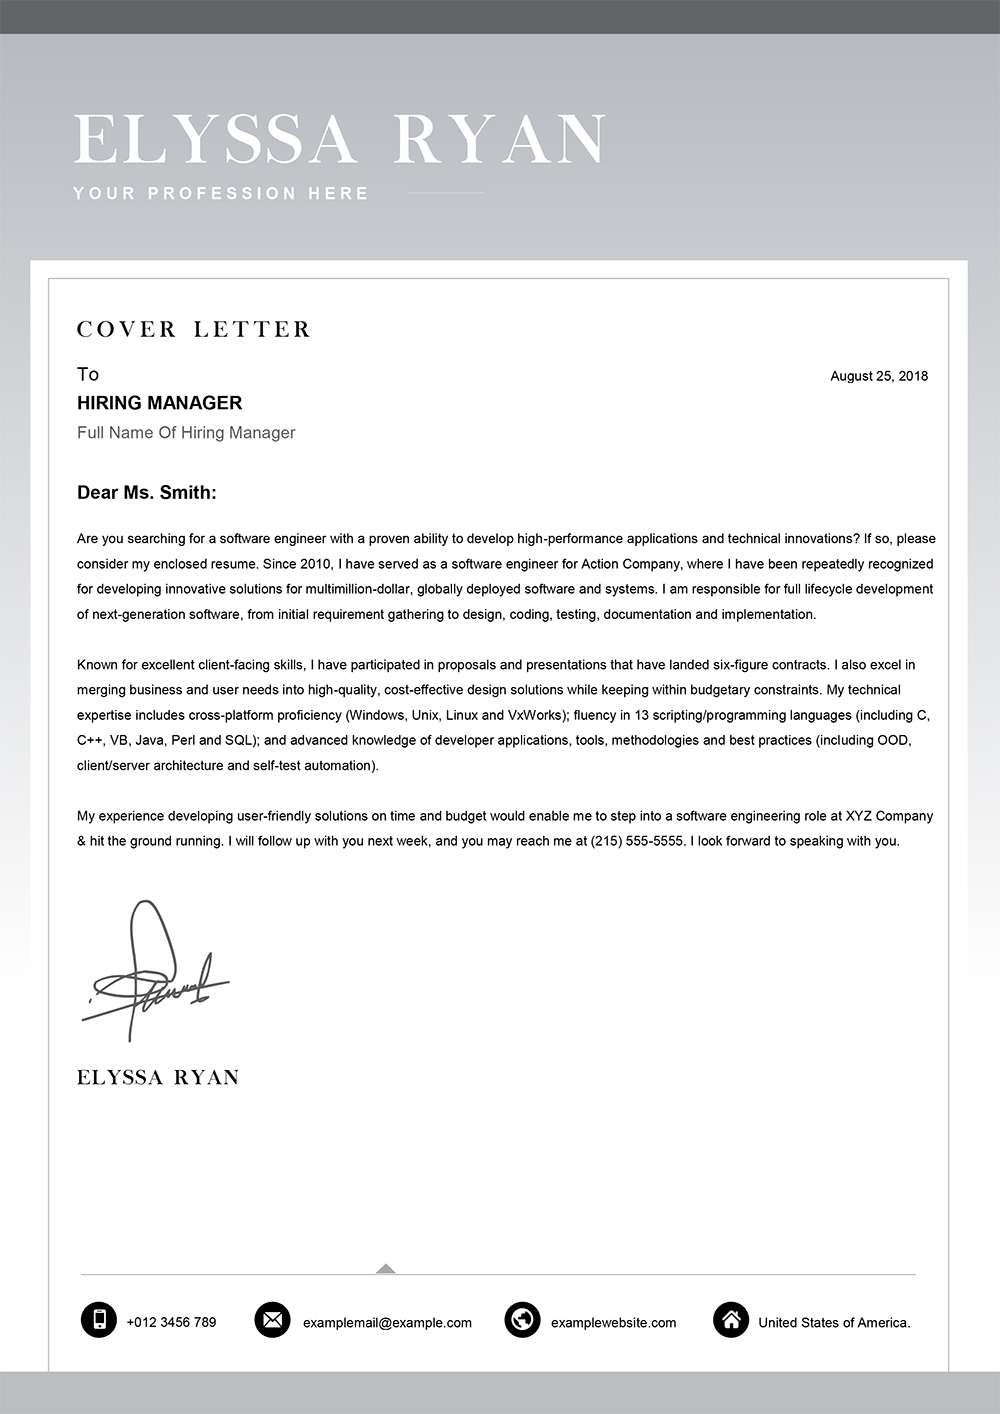 Job Application Cover Letter Template 1 